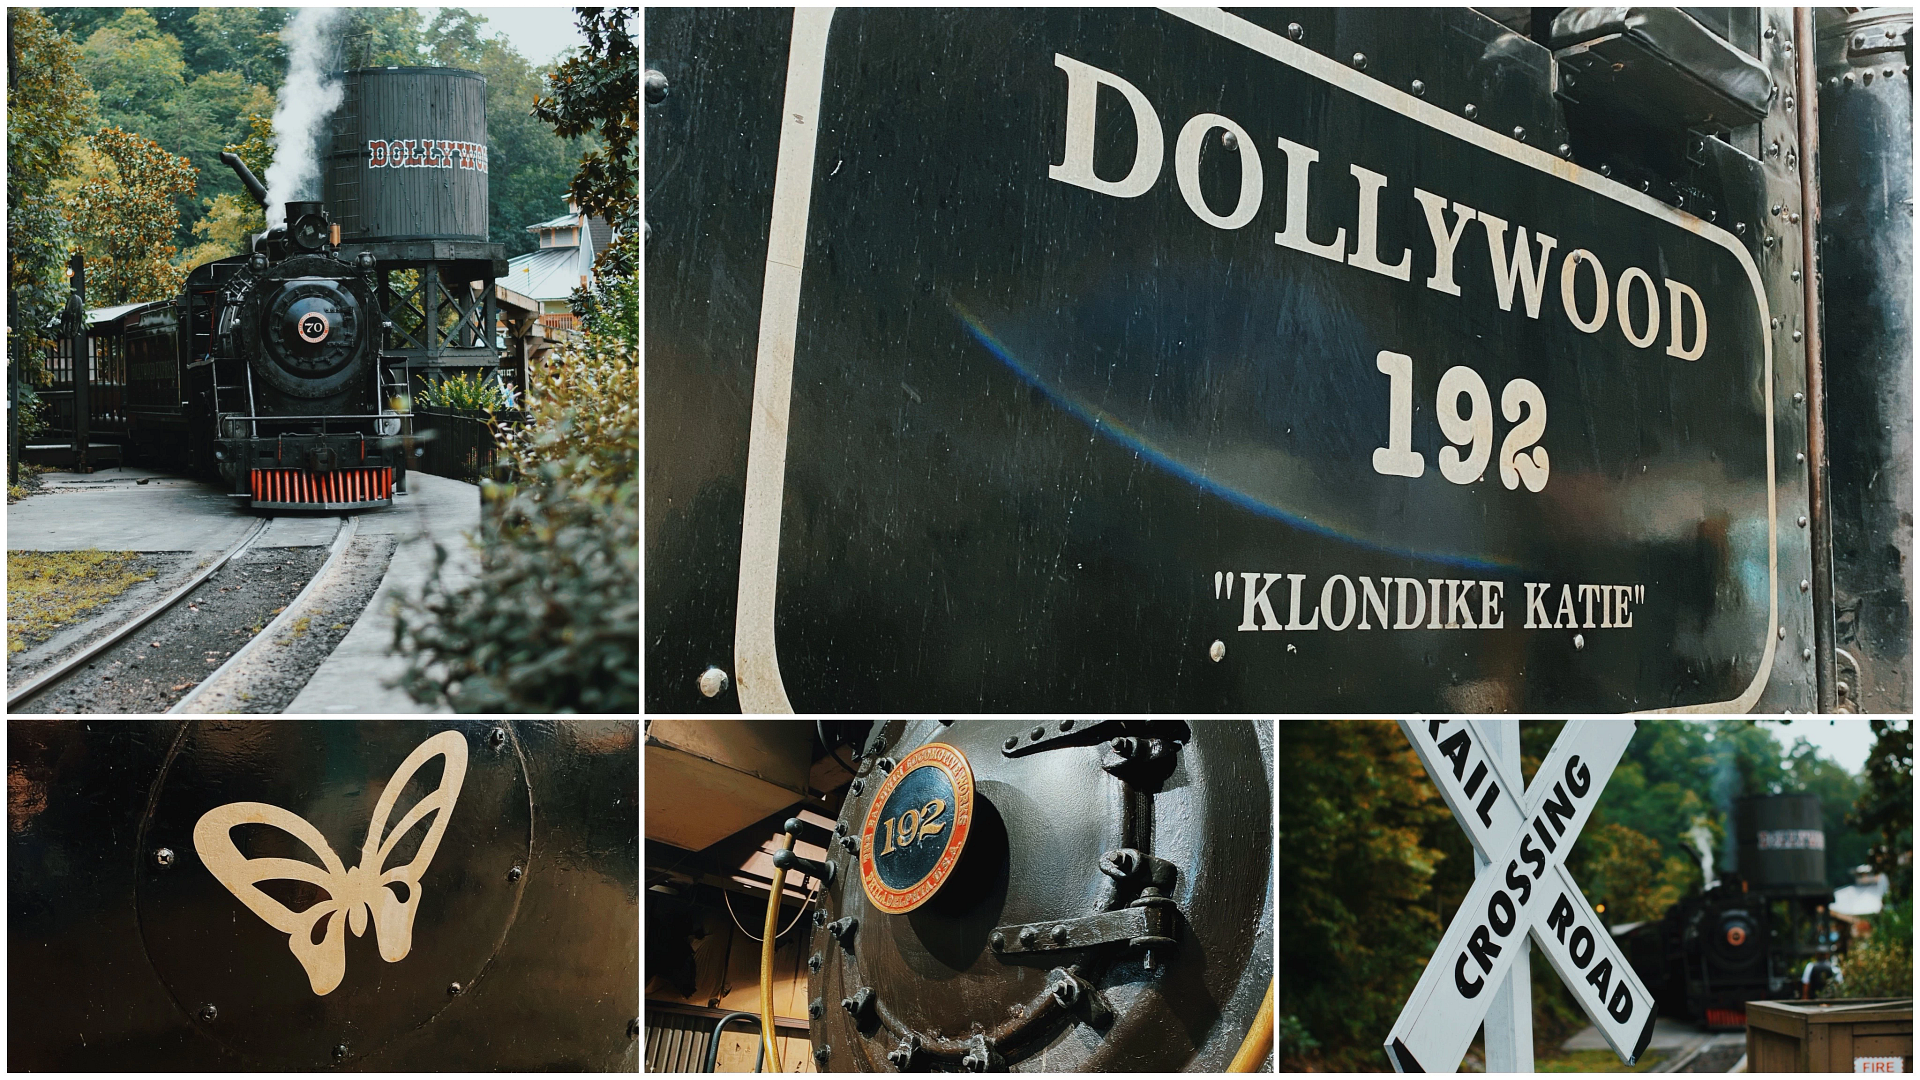 Full Steam Ahead: Keeping the Dollywood Express on Schedule